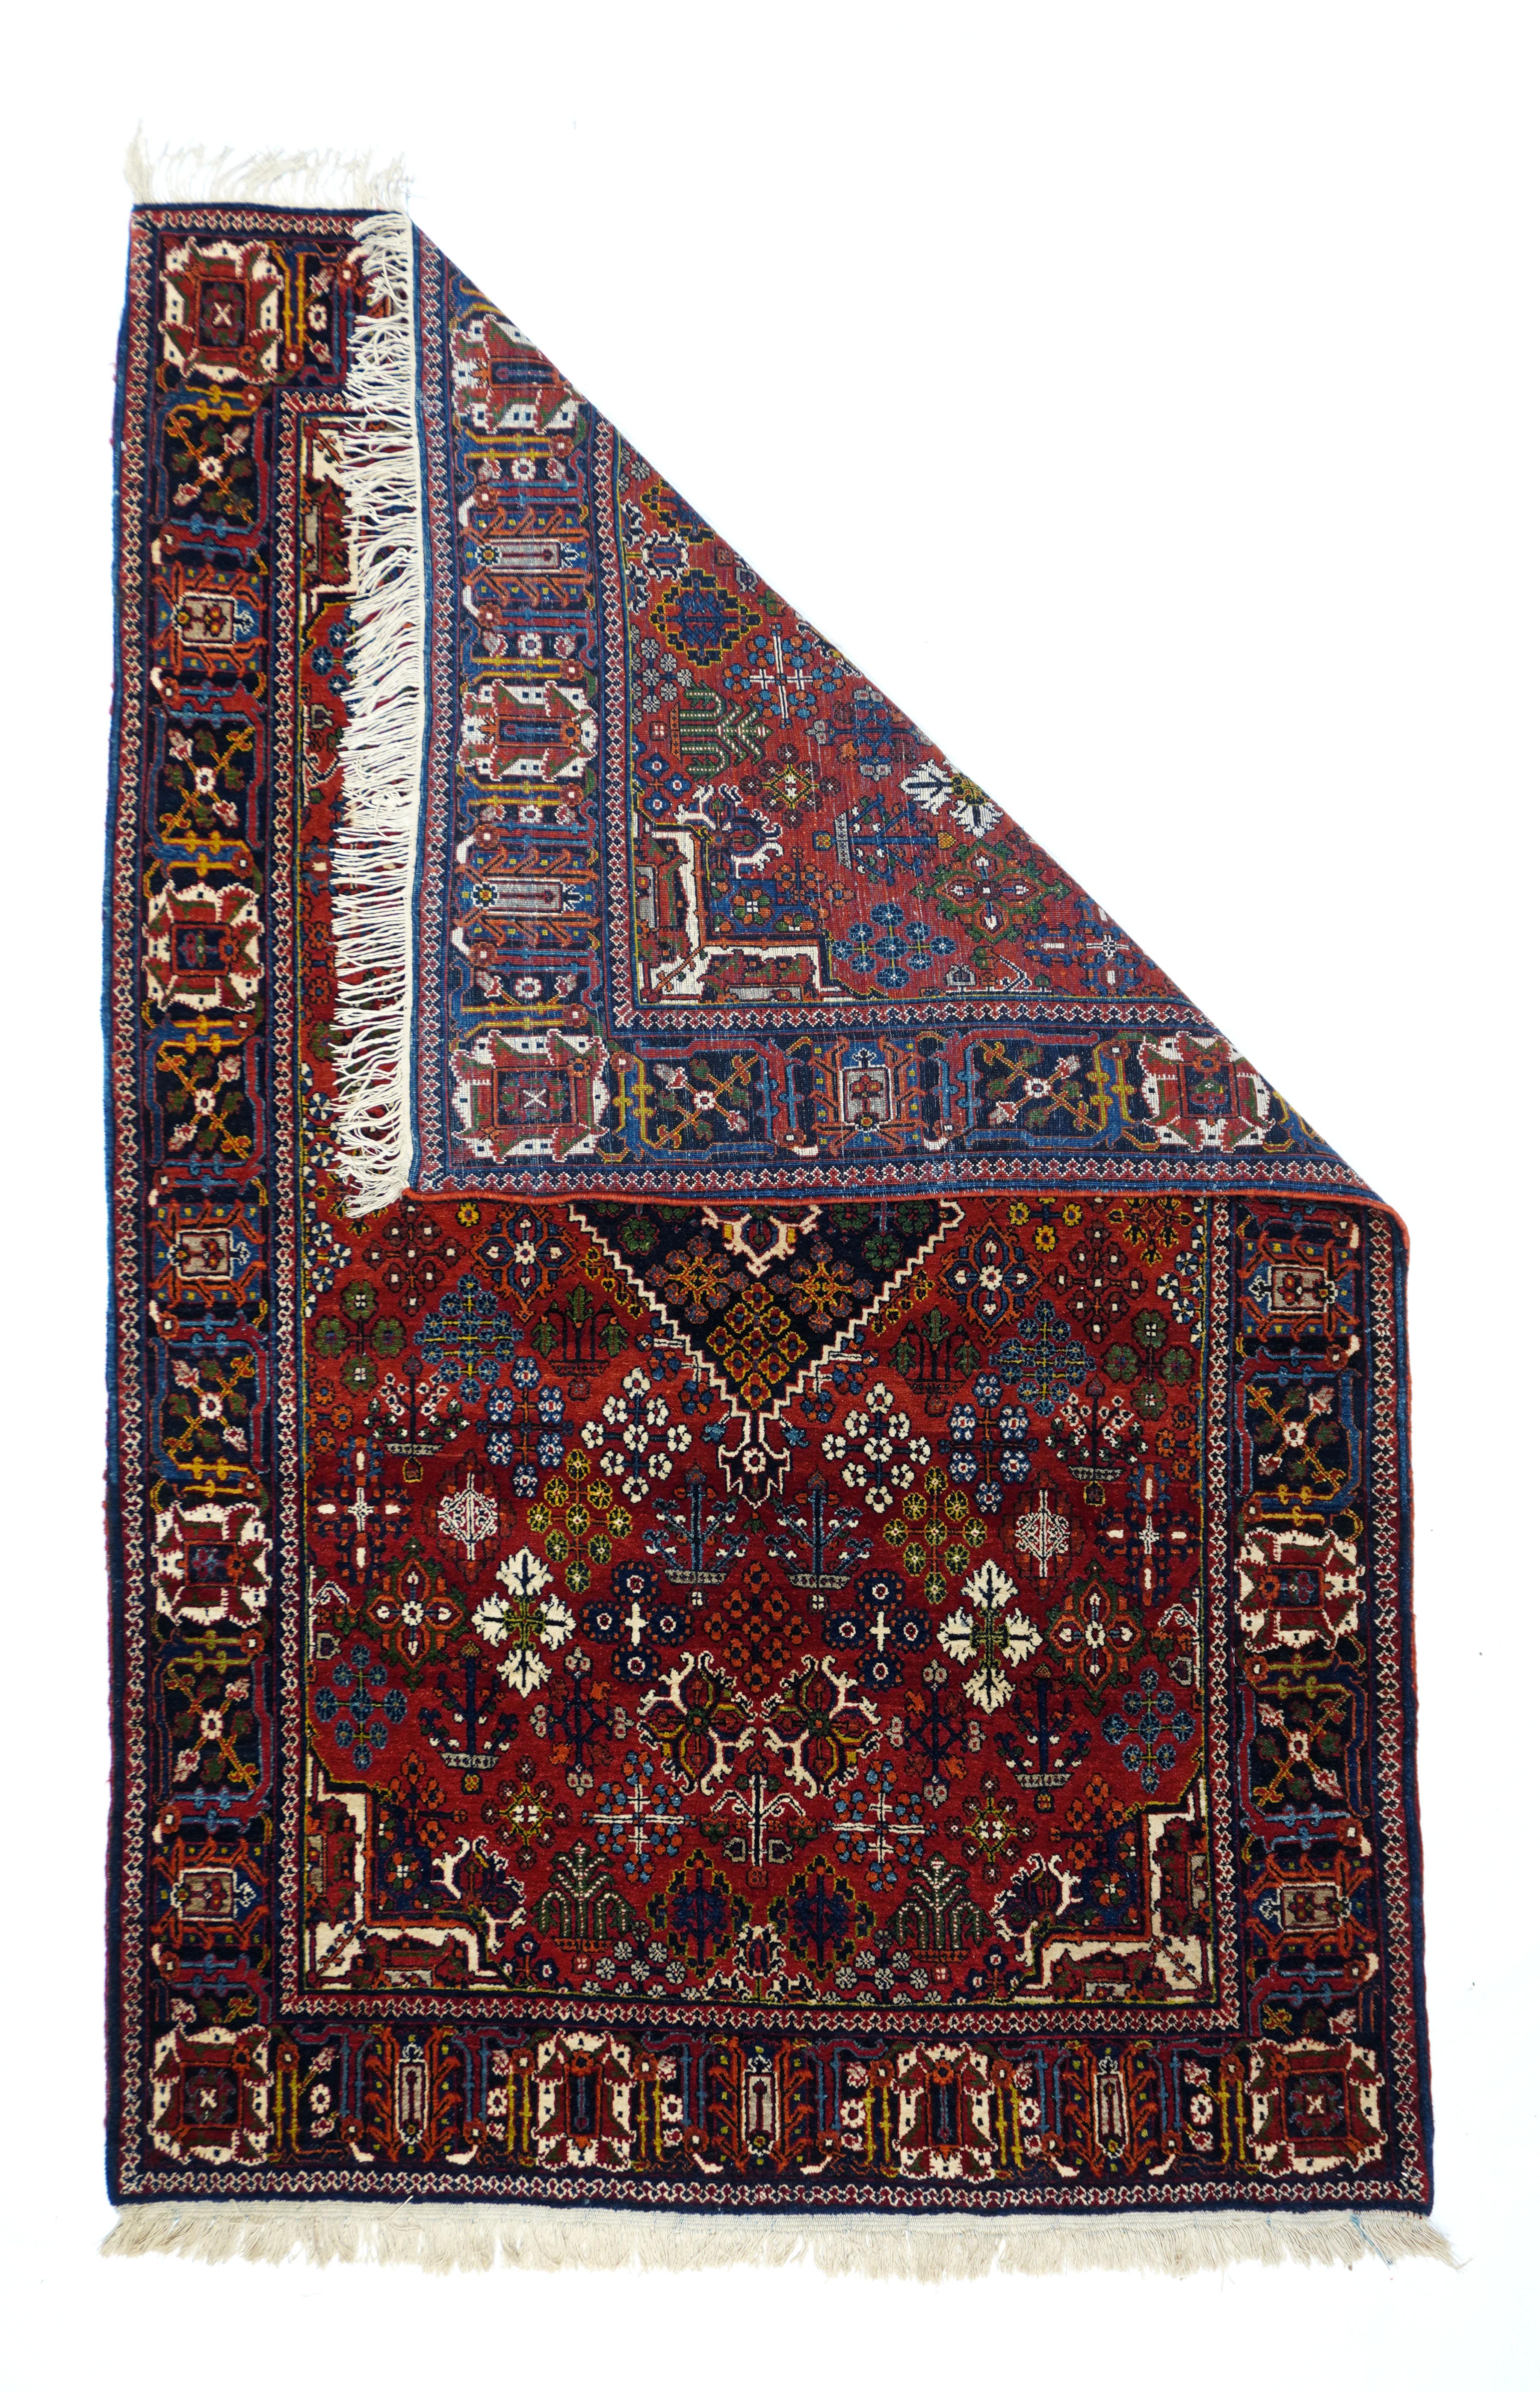 Vintage Joshagan rug 4'3'' x 6'7''. Joshogan (Joshagan), in central Persia specializes in only a few designs, especially one derived from Safavid originals, consisting of diamond or lozenge-shaped floret arrays, often around a central contrasting,